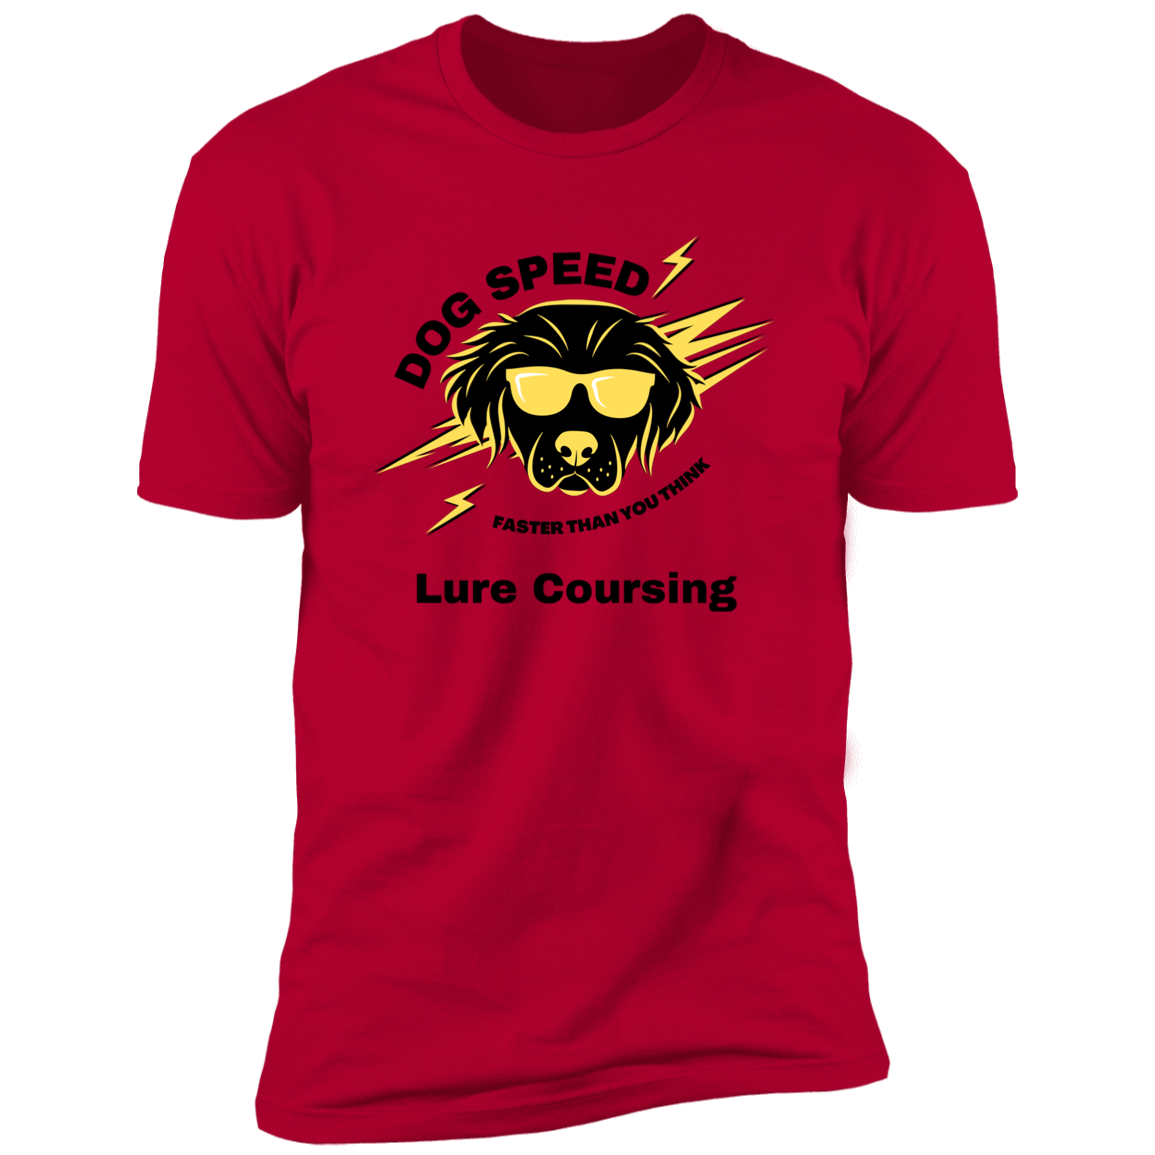 Dog Speed Faster Than You Think Lure Coursing T-shirt, Lure Coursing shirt dog shirt for humans, in red